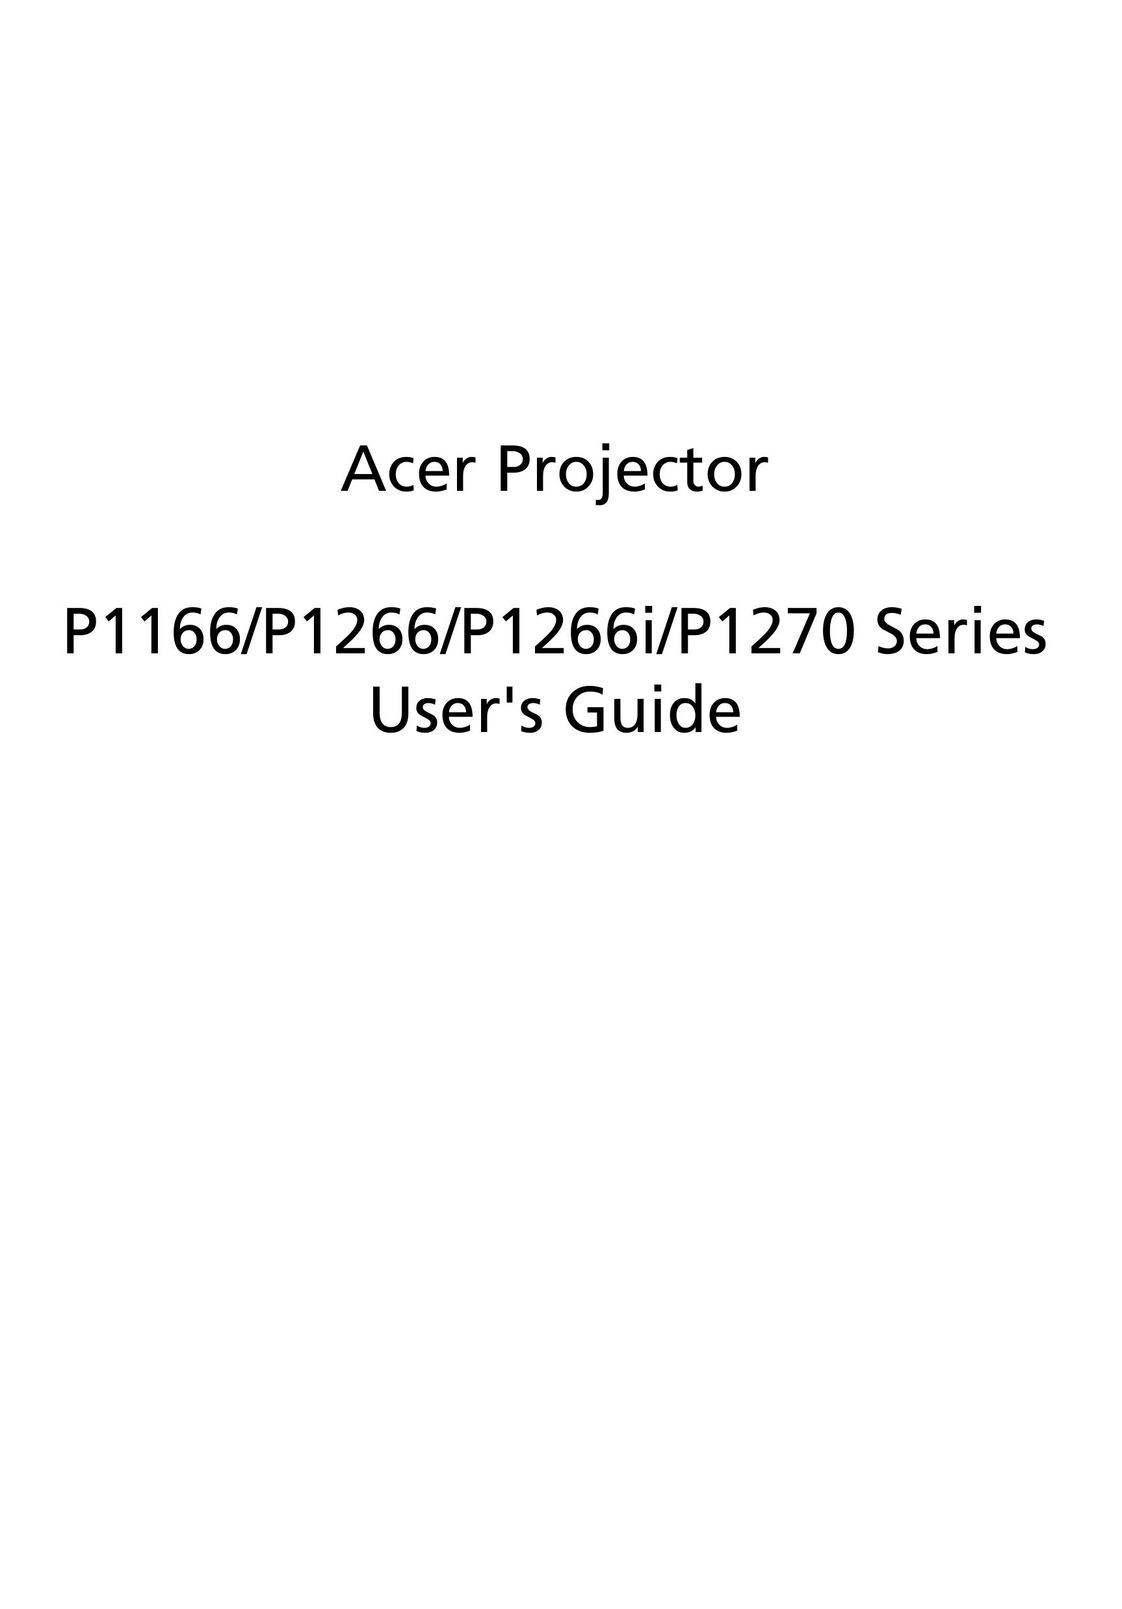 Acer P1270 Projector User Manual